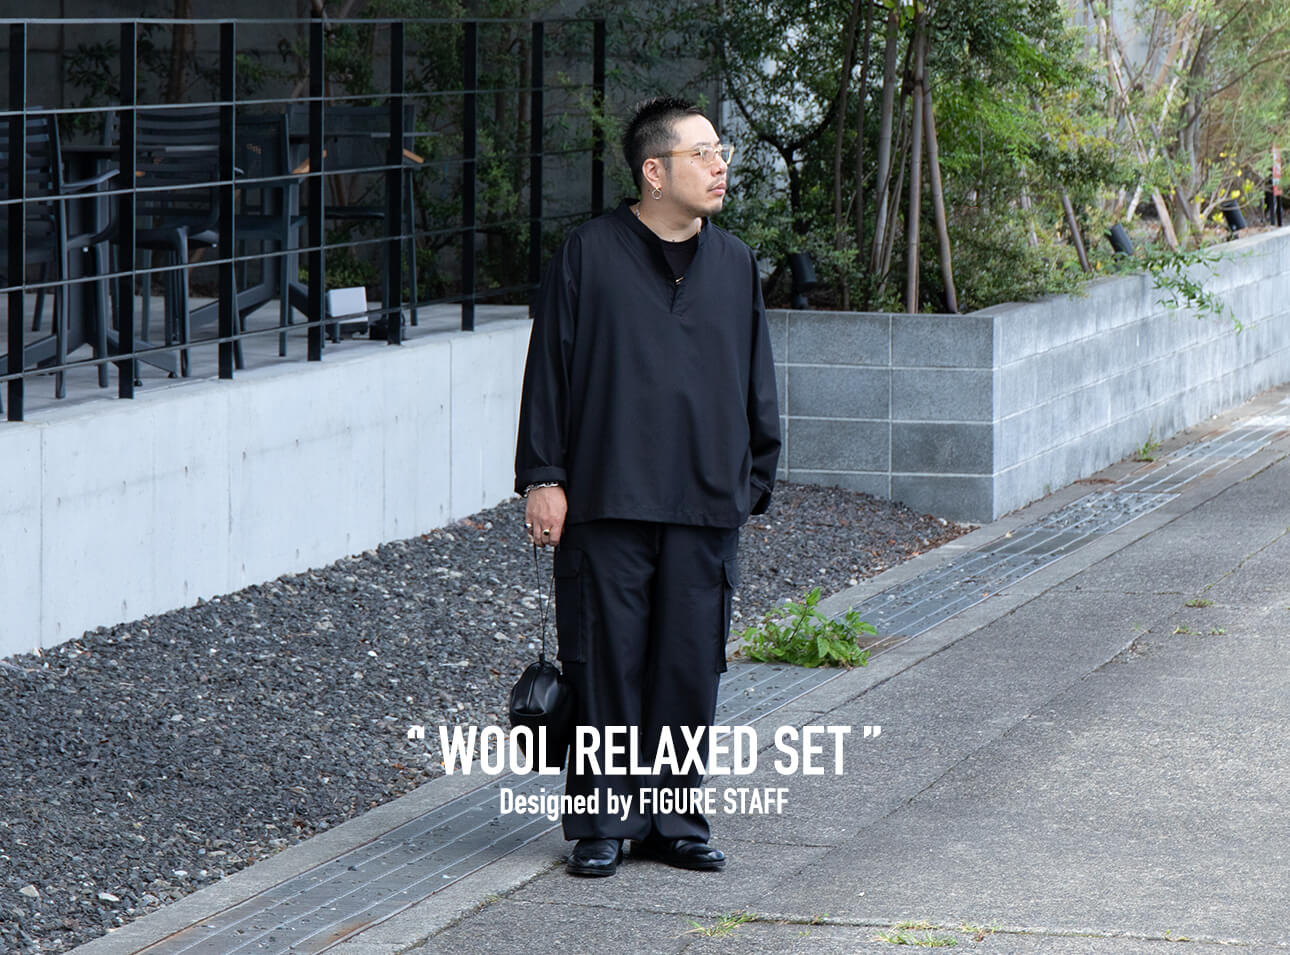 “ WOOL RELAXED SET ”Designed by FIGURE STAFF